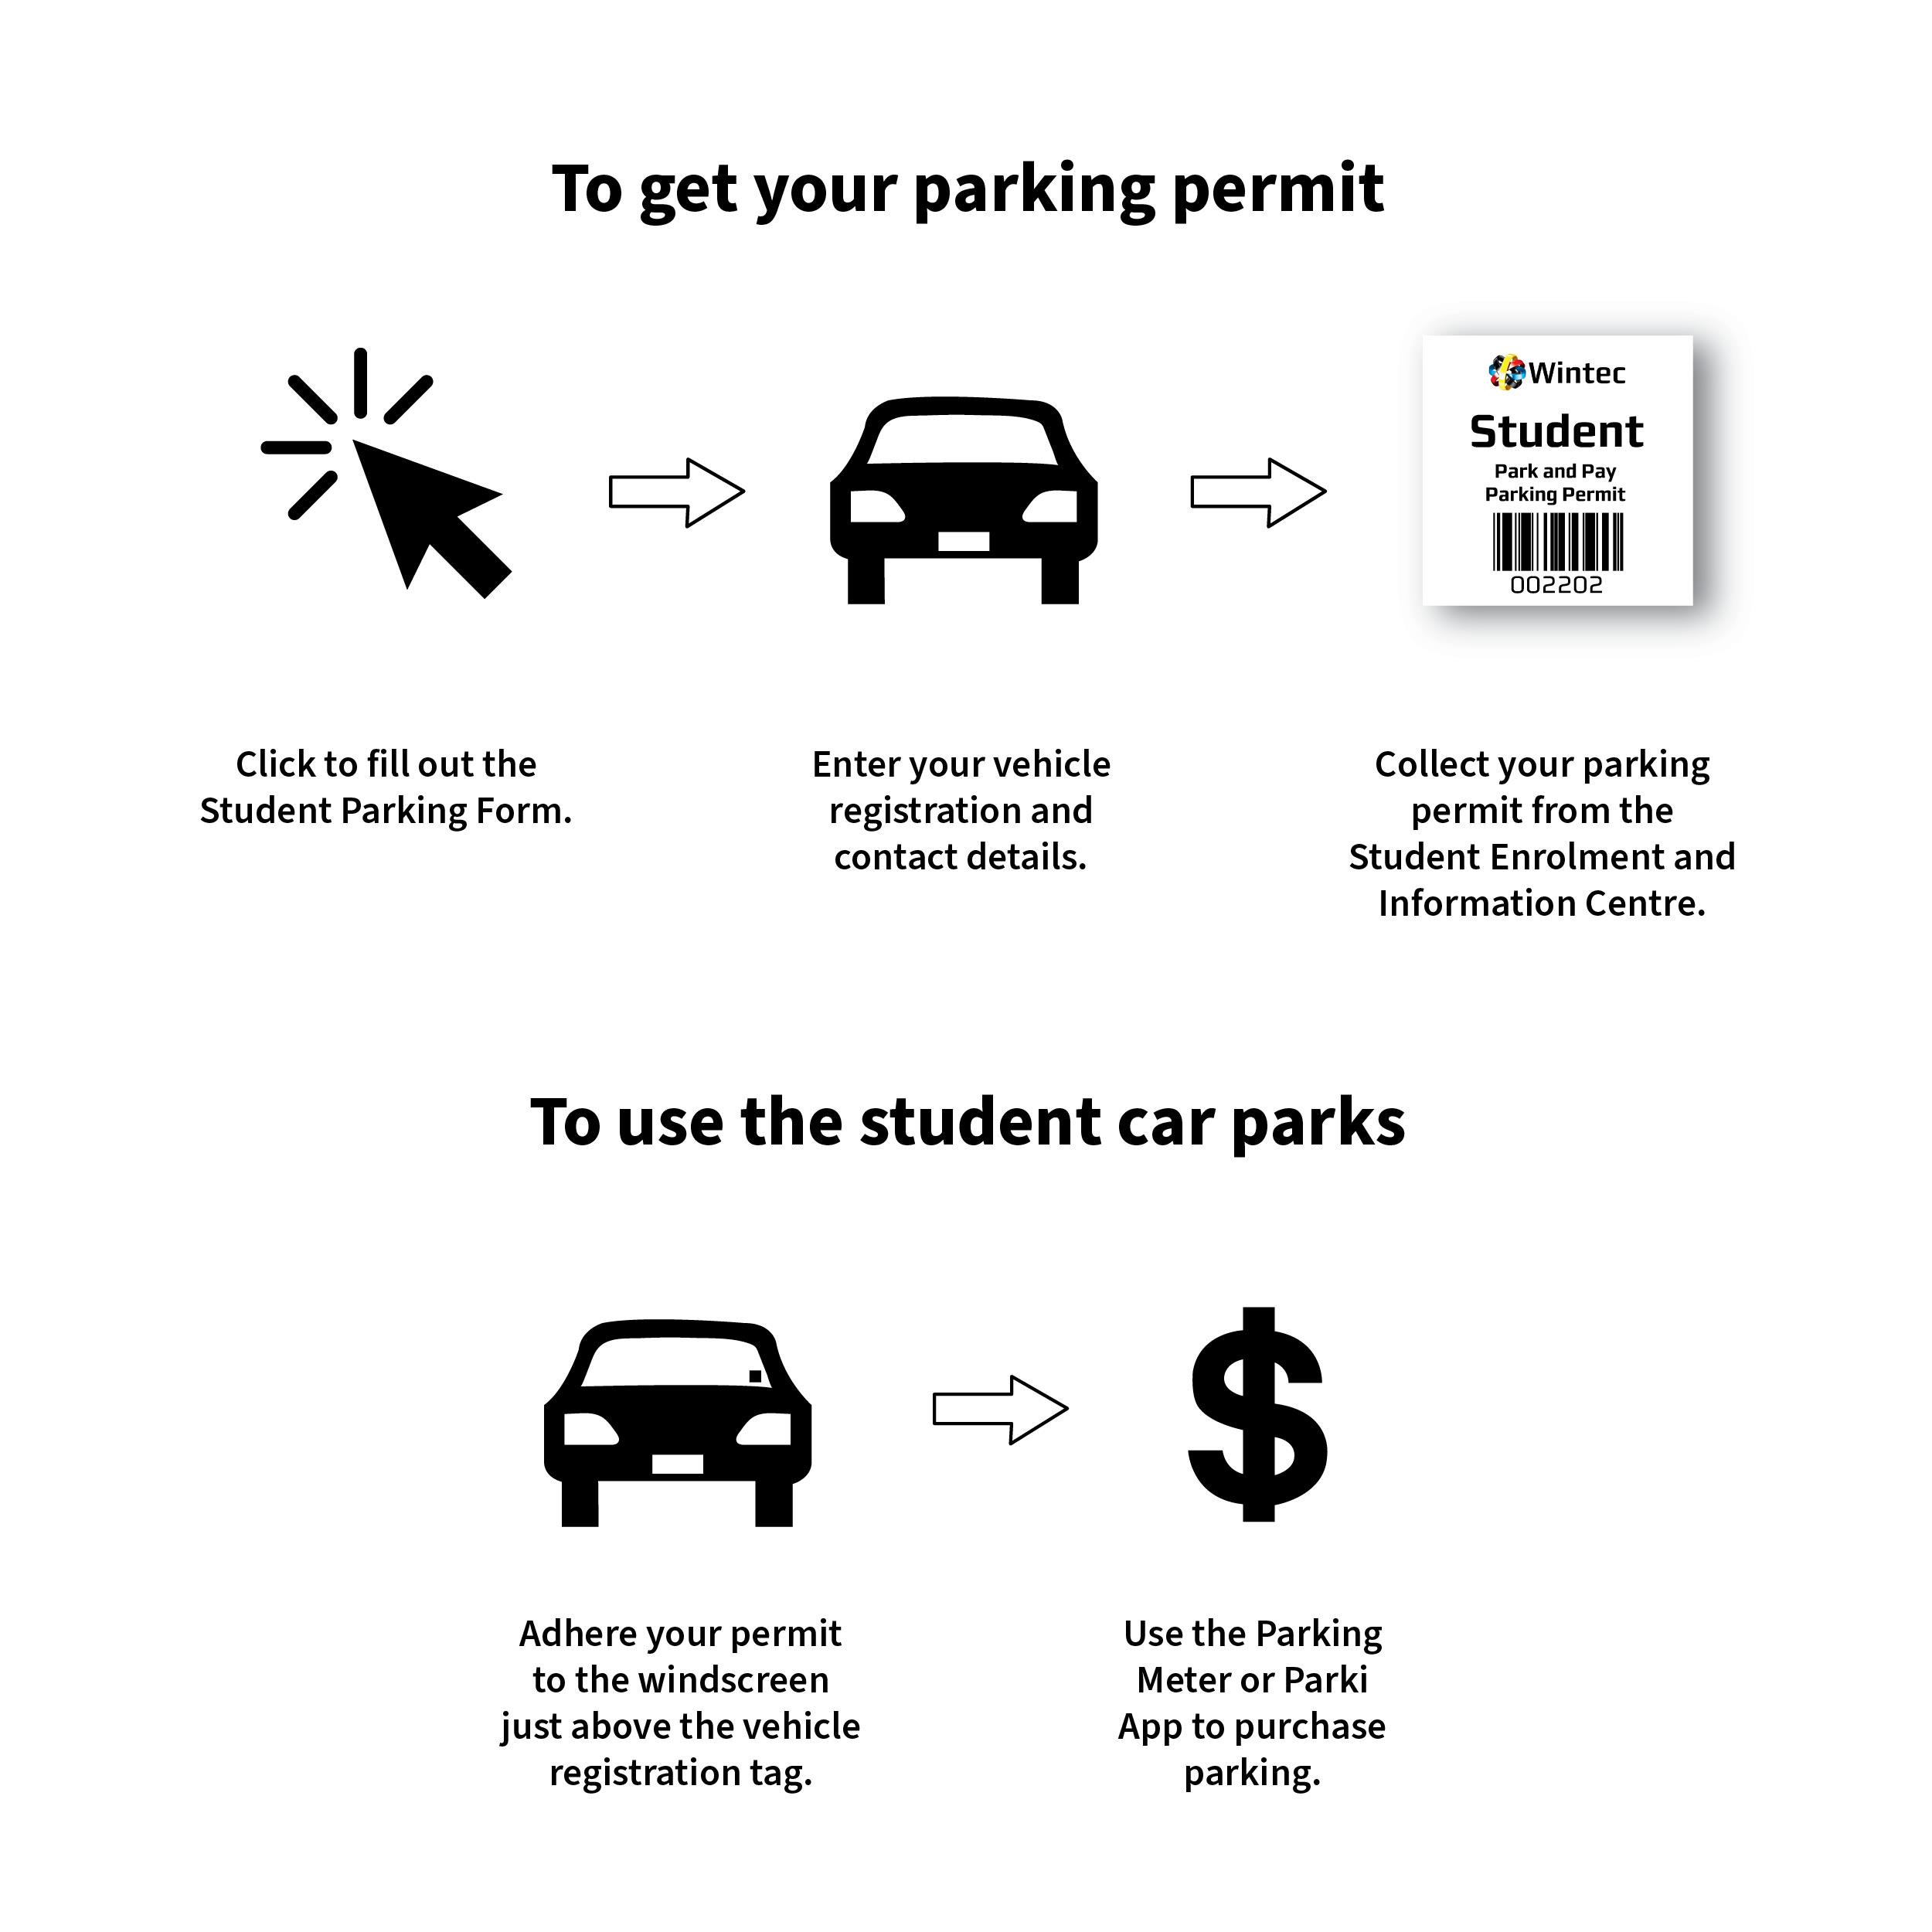 How to get and use your student parking permit